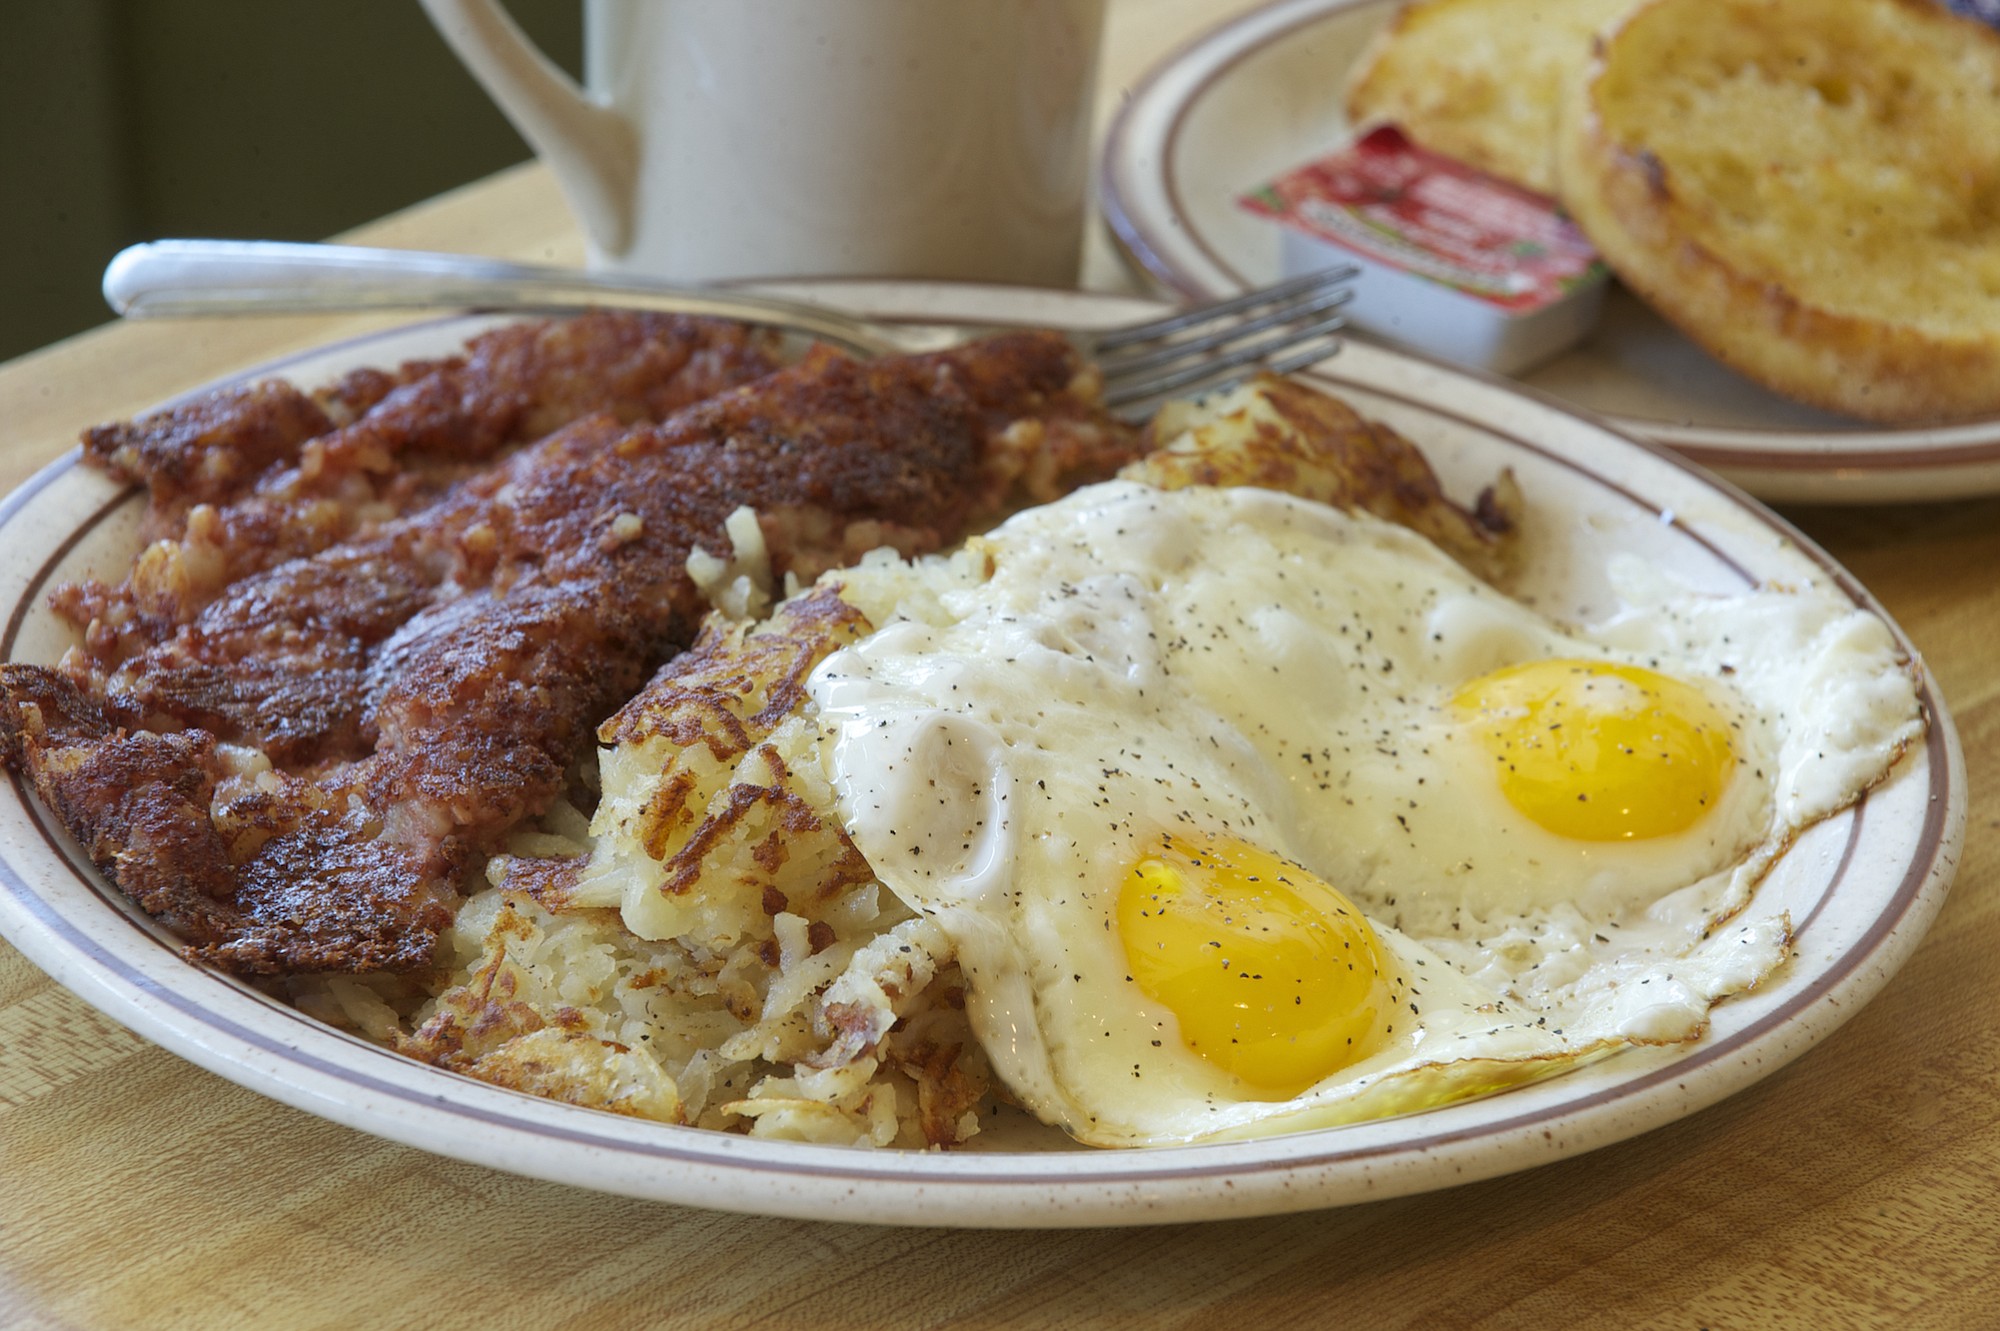 Corned beef hash, hash browns and sunny-side-up eggs with an English muffin and coffee at Joe Brown's Cafe.